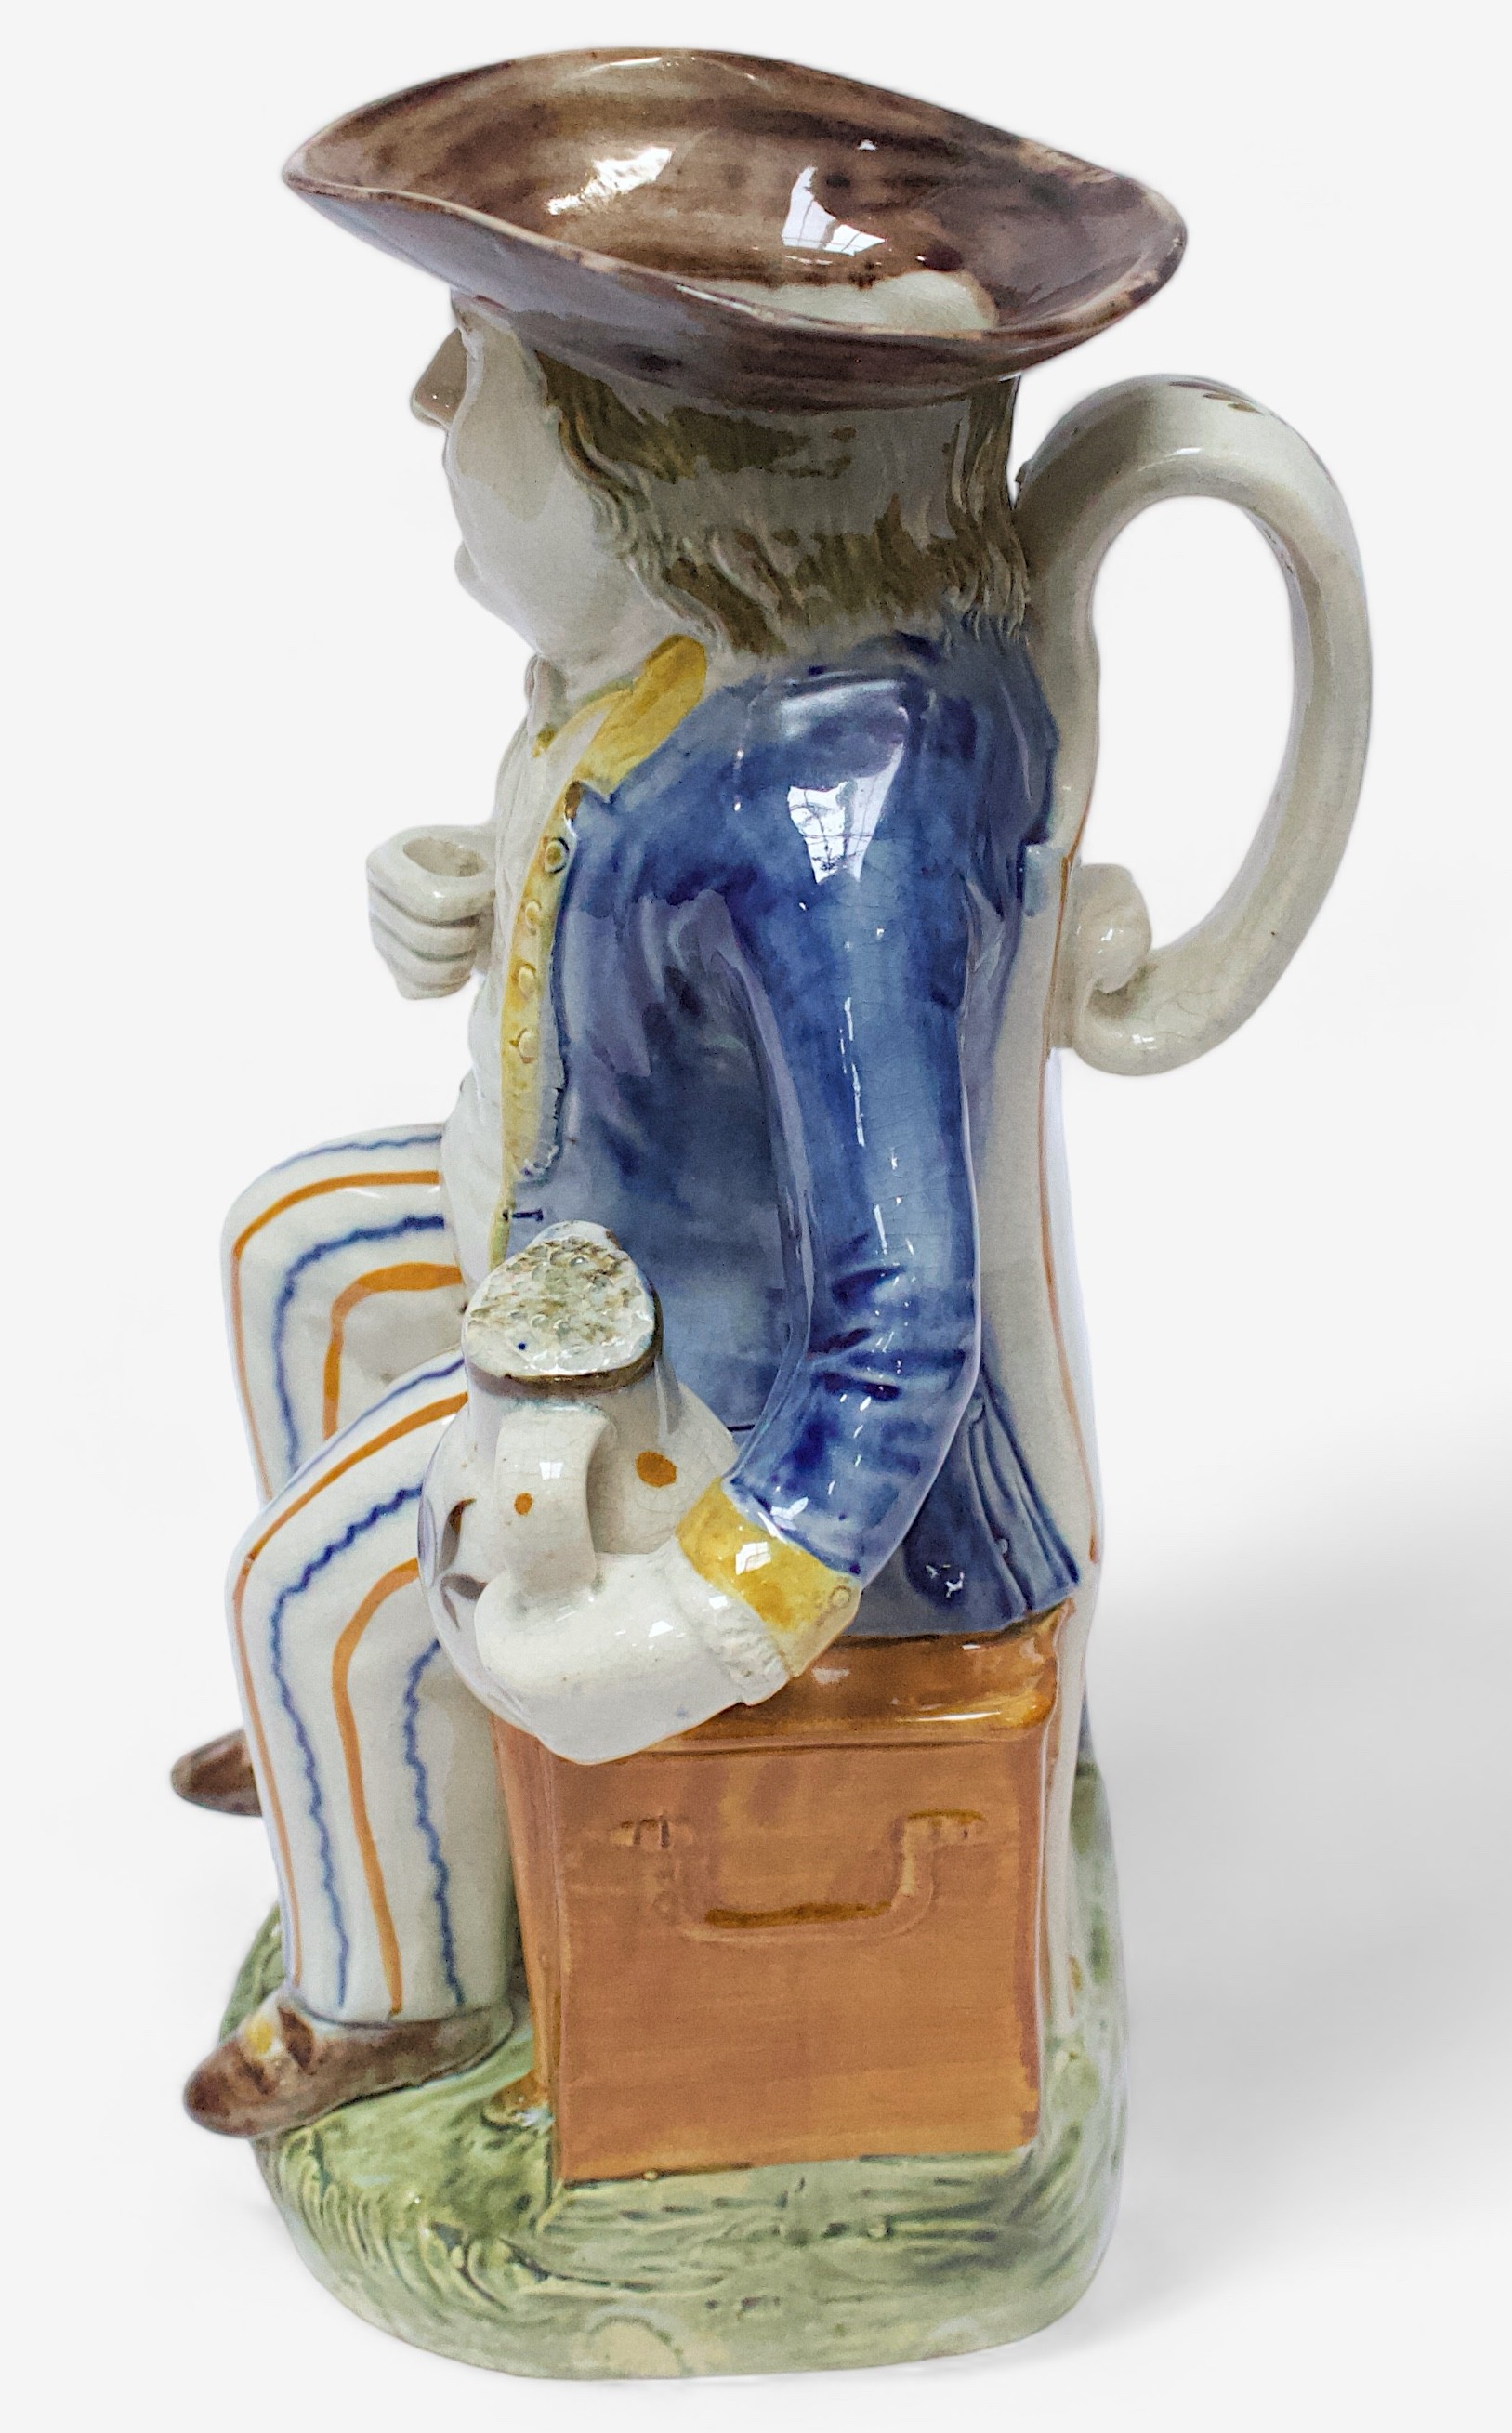 A Prattware Pottery ‘Sailor’ toby jug, c1790-1810, seated holding a jug, striped britches, blue coat - Image 4 of 4